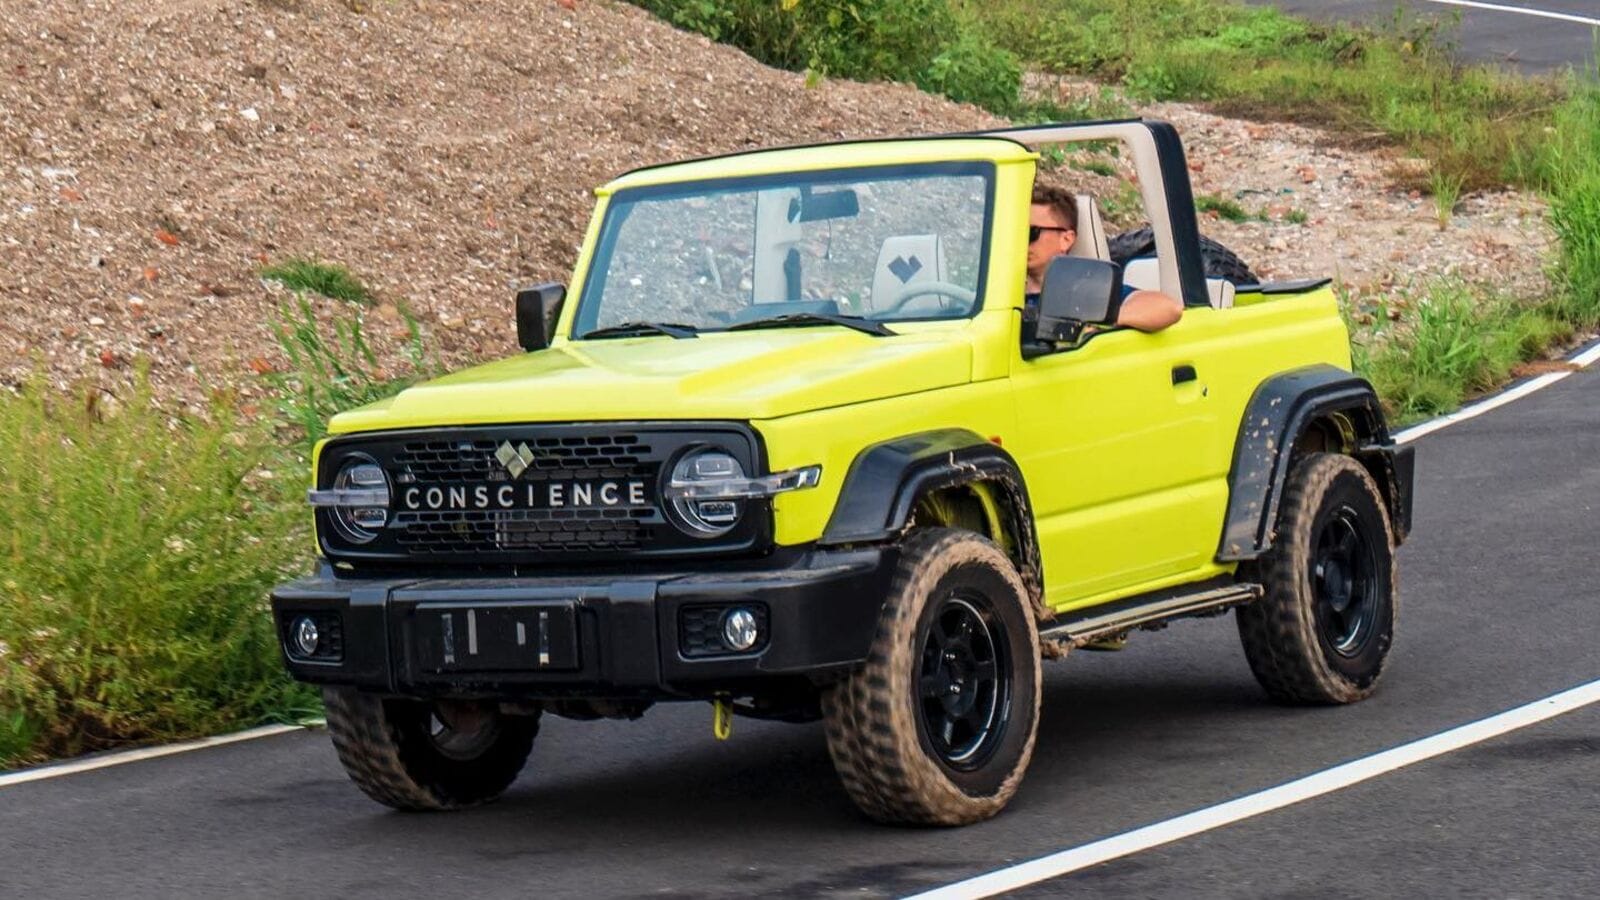 Suzuki Jimny Convertible is fun to drive, not official though